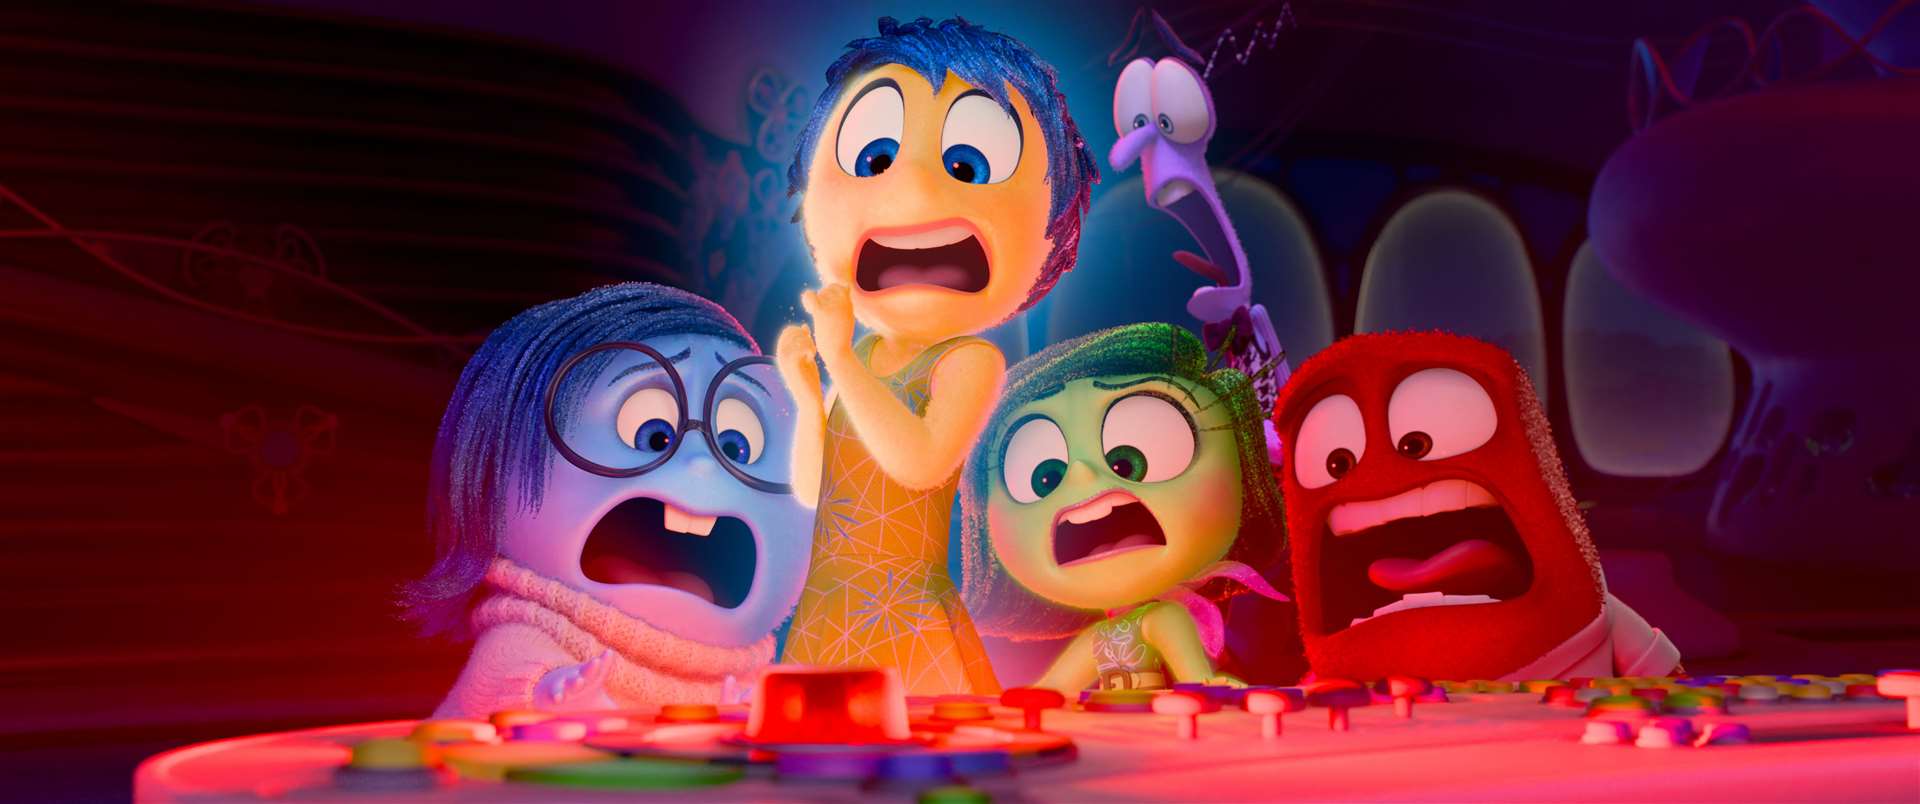 The sequel to Disney-Pixar film Inside Out, which won the Academy Award for Best Animated Feature, is released this summer